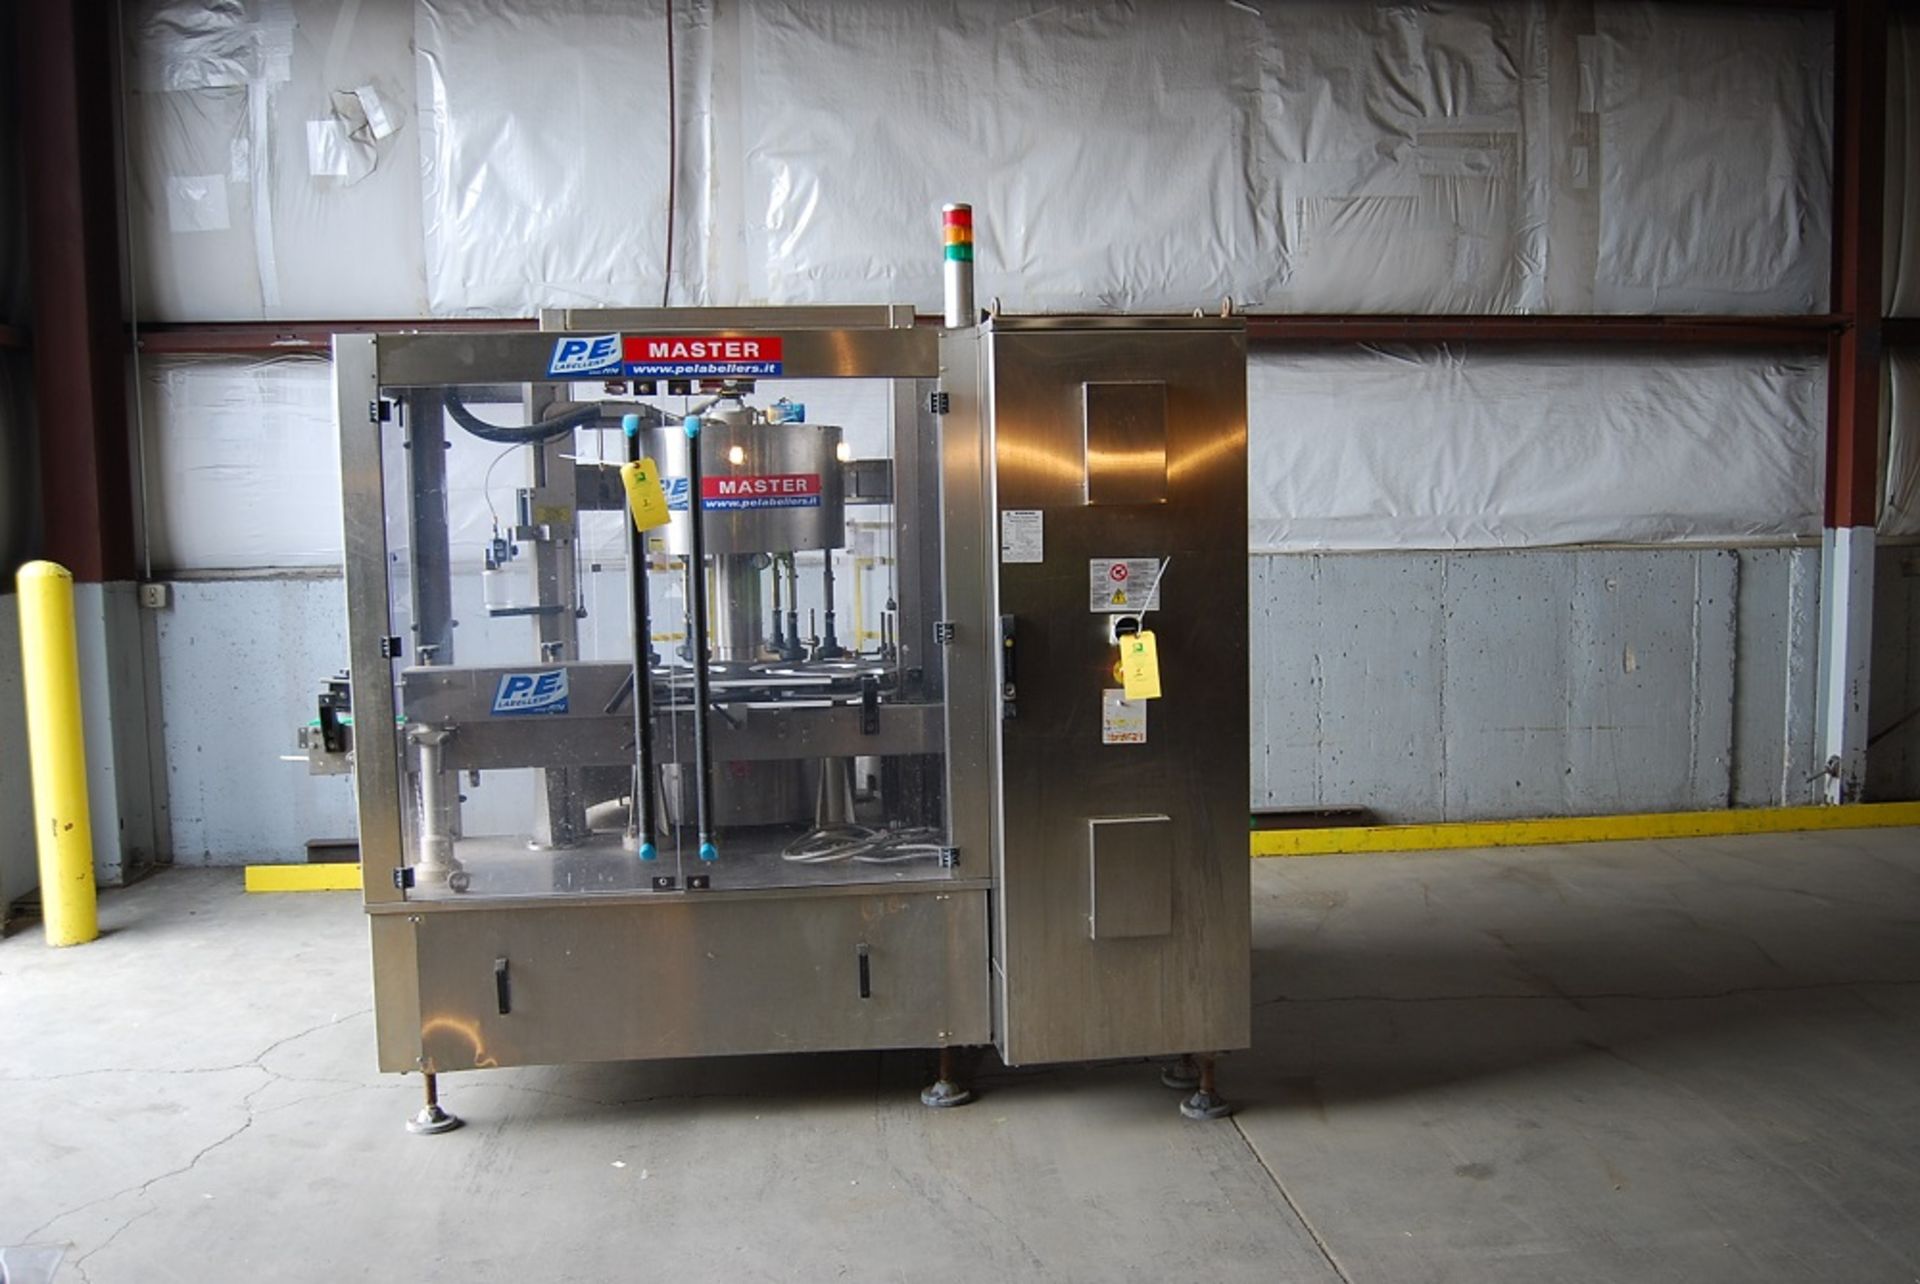 PE Labeler, Model: Master M-S 540/6T/2S-2E. SN: Y271011390 480 Volts, 3 Phase 60 HZ, MFG: 2013 - Image 2 of 25